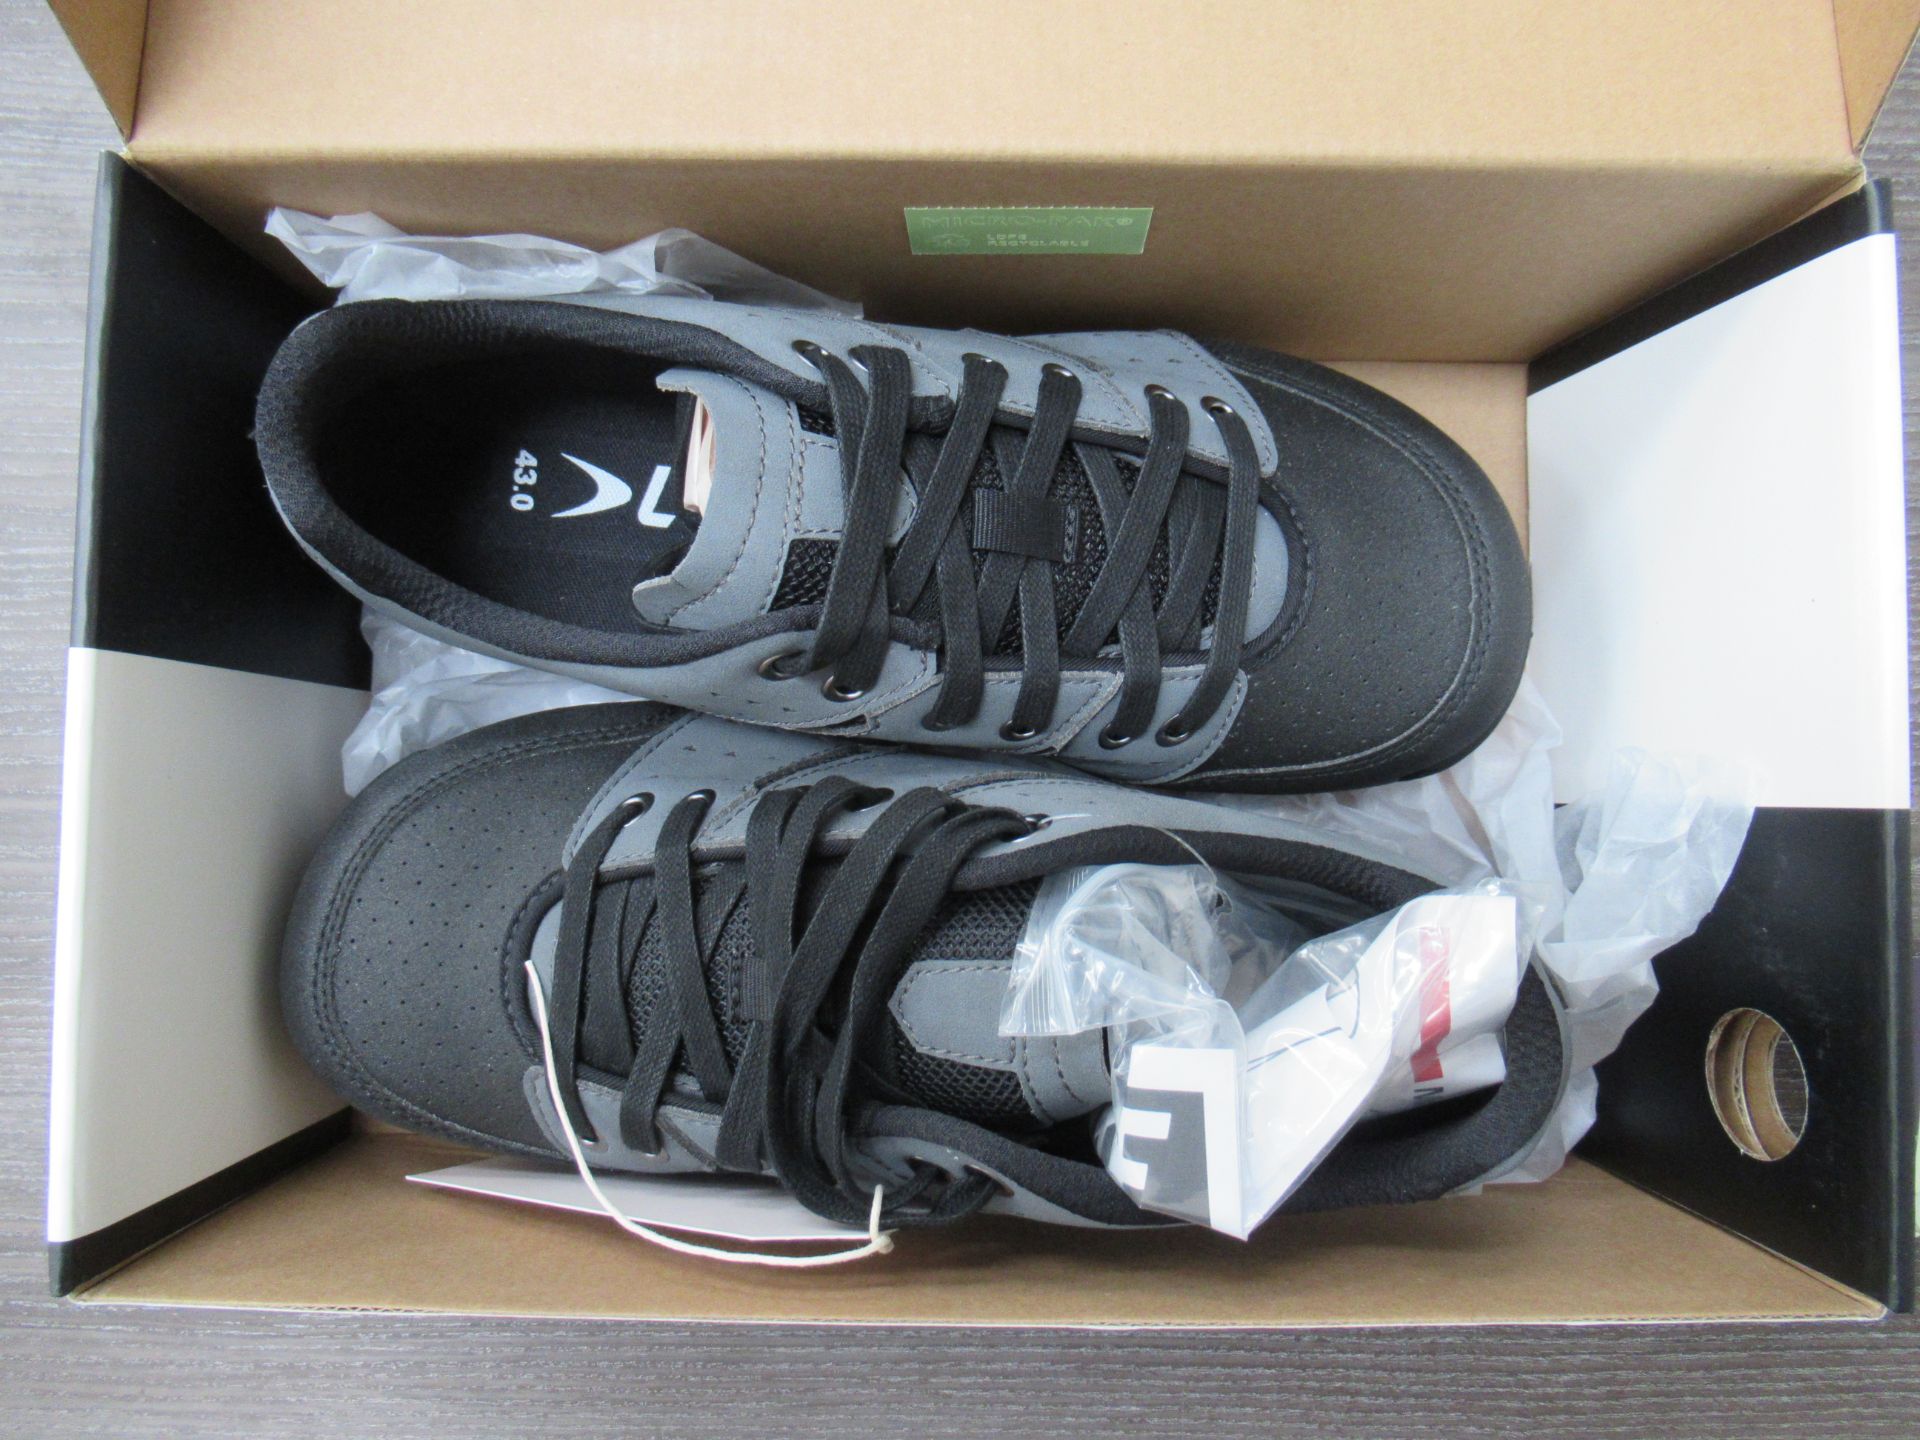 Pair of Lake MX169 cycling shoes (grey/black) - boxed EU size 43 (RRP£142) - Image 4 of 4